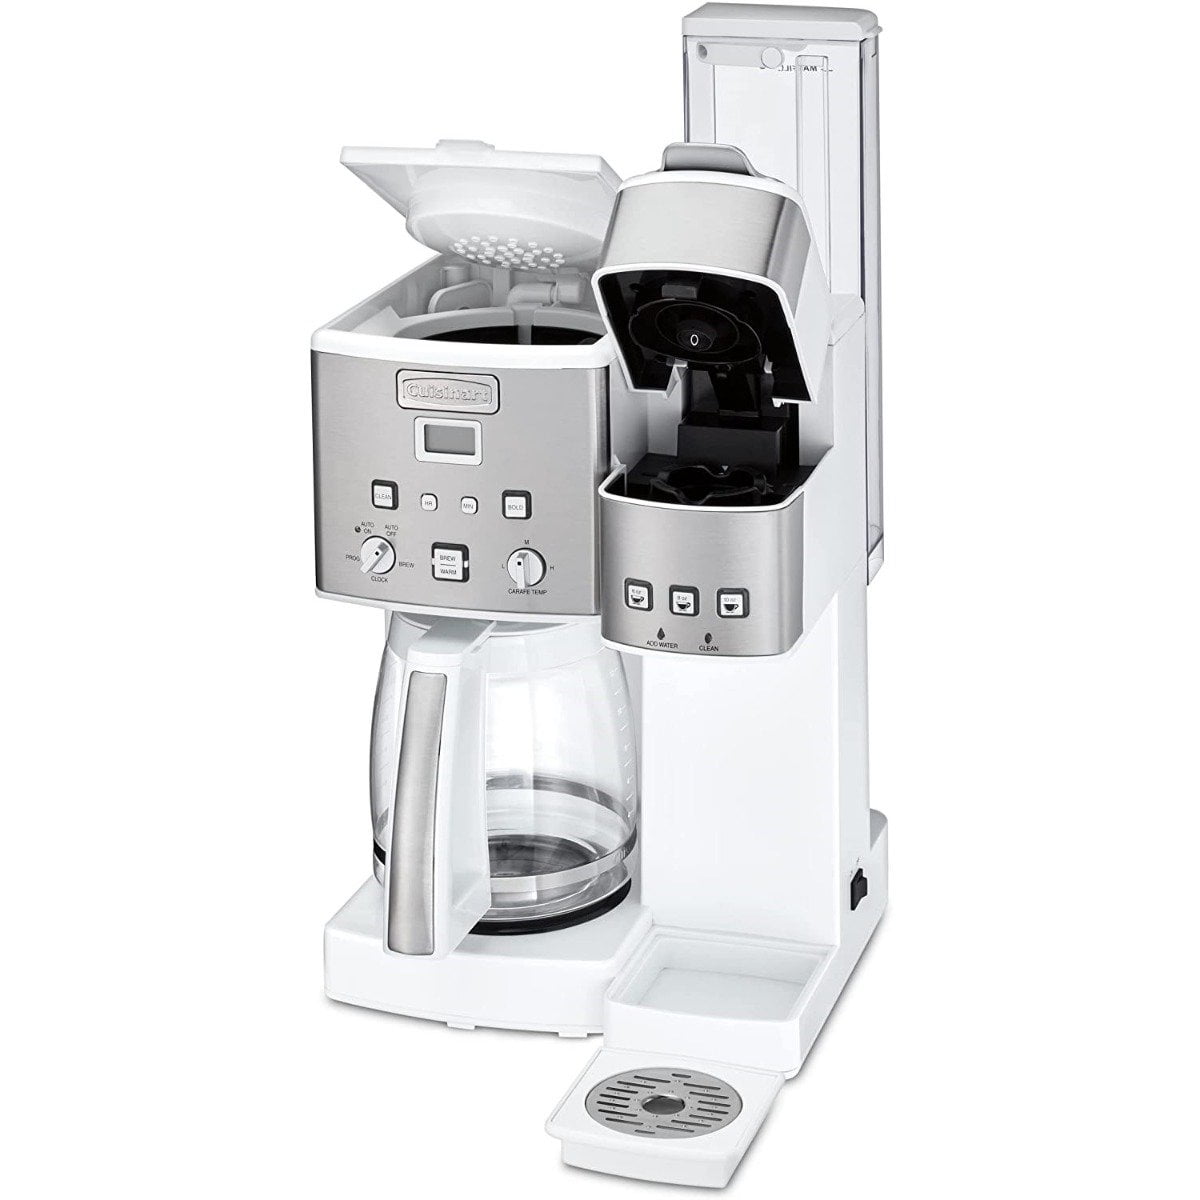 STAY by Cuisinart WCM280W White 12 Cup Coffee Maker - 120V